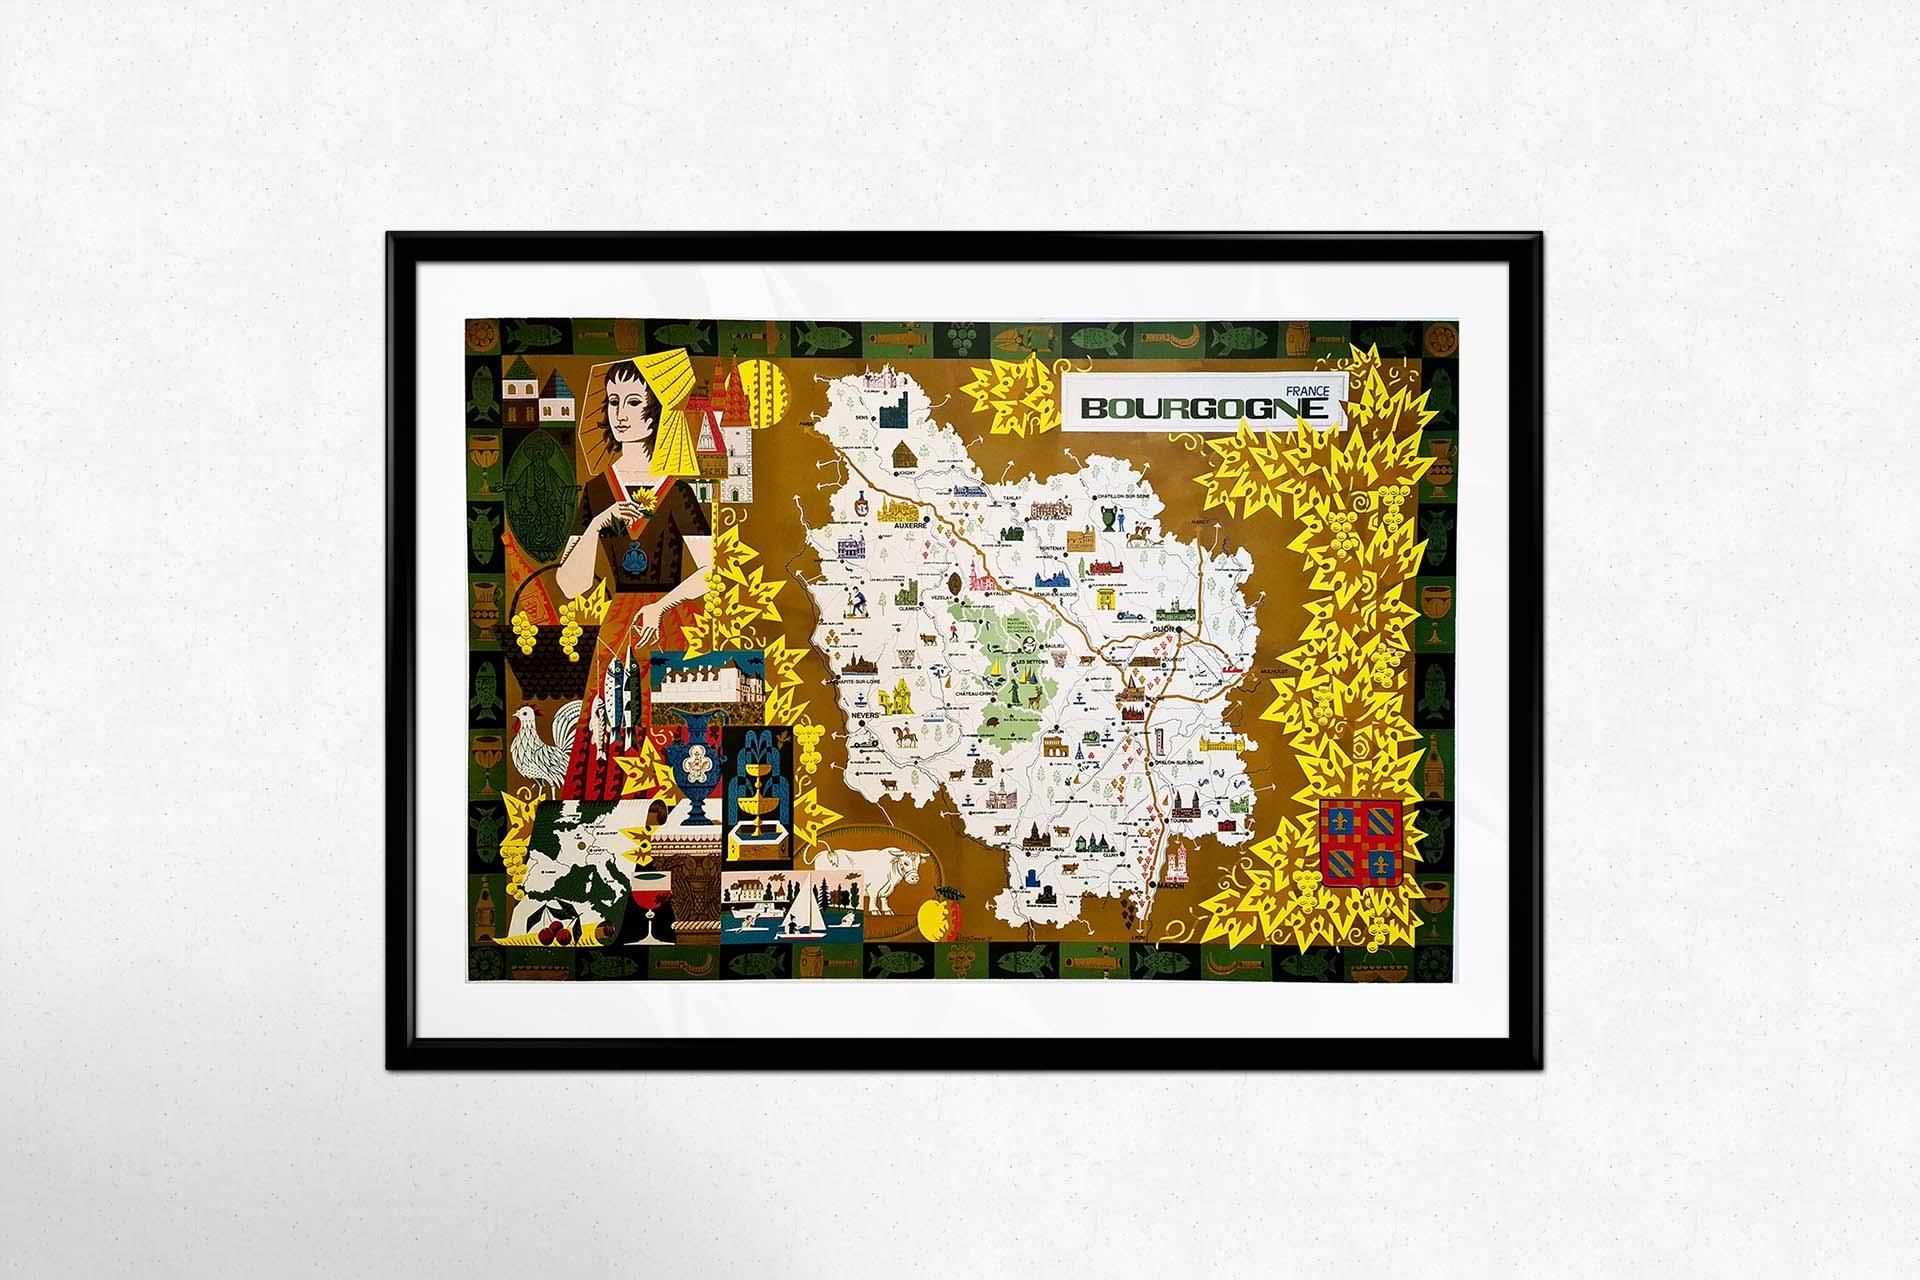 Beautiful geographical poster of Burgundy created by Alain Cornic in 1979 For Sale 2